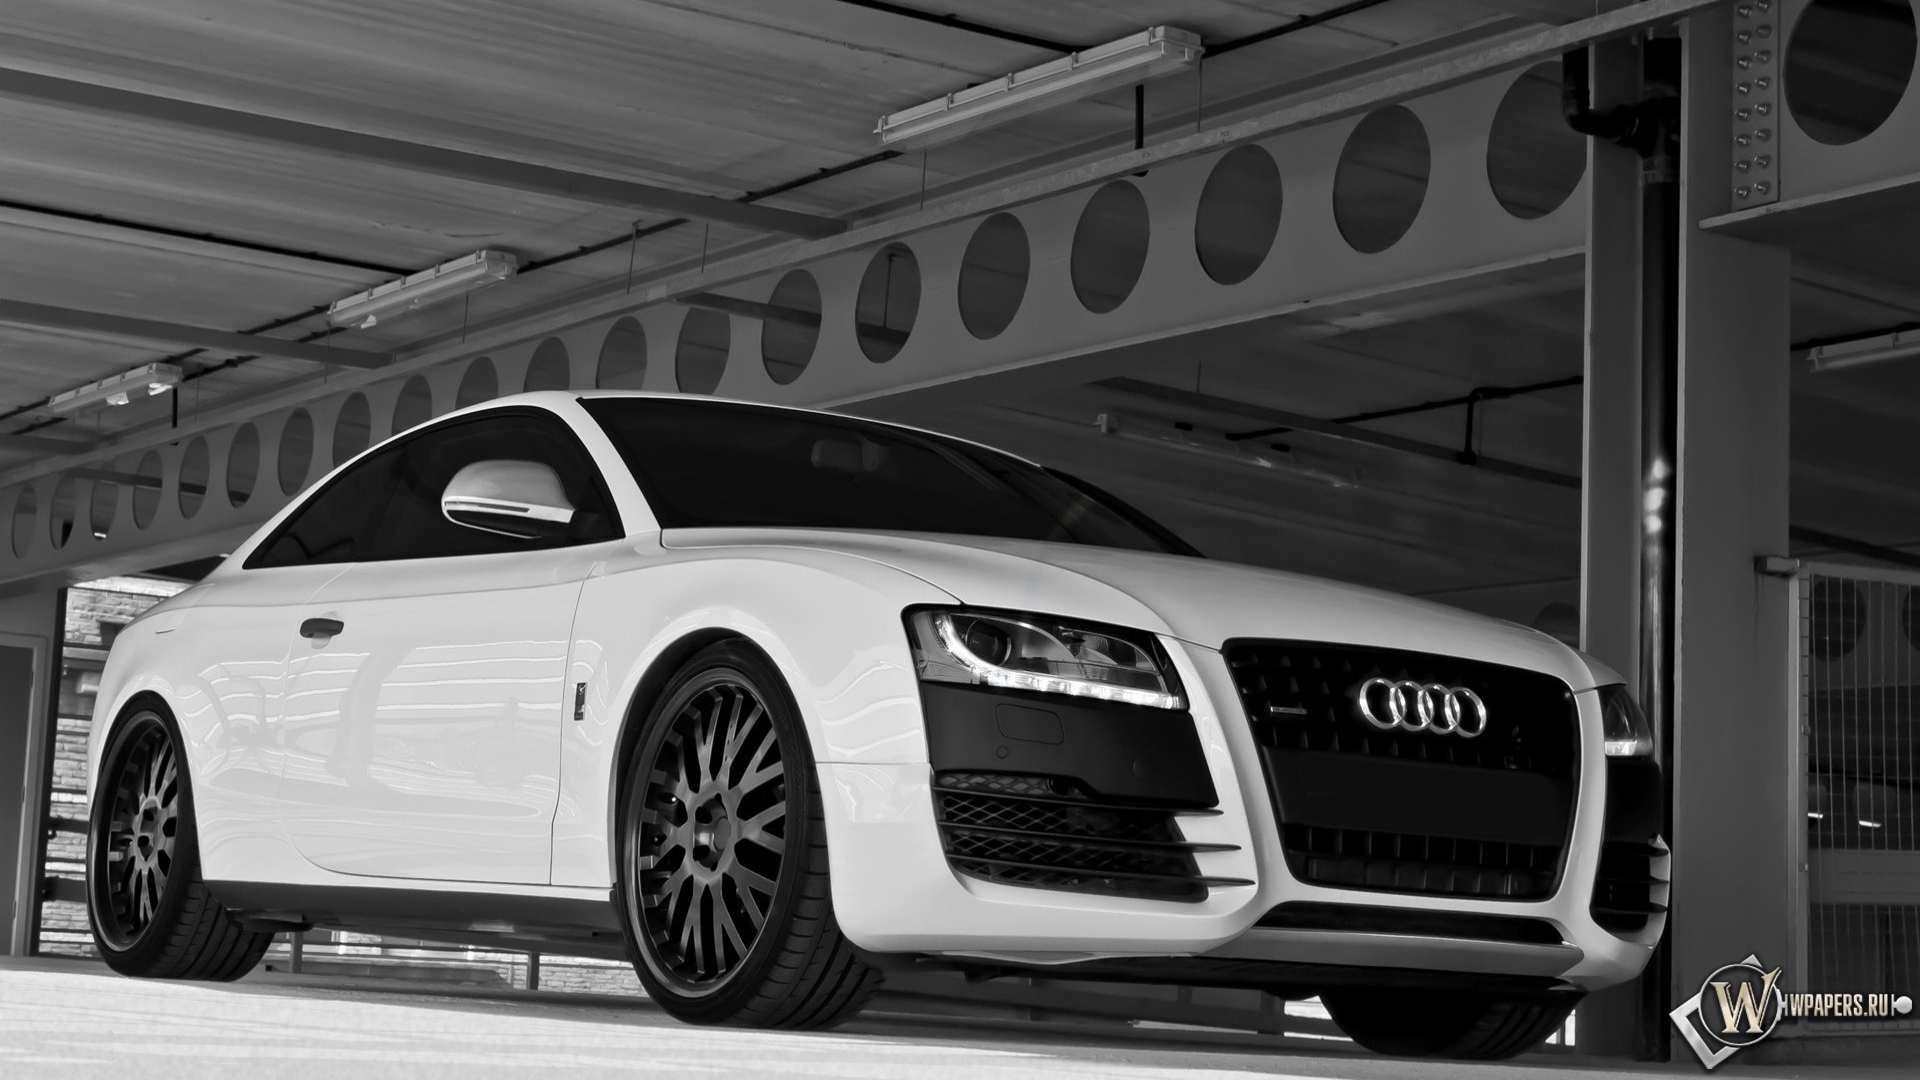 2011 Project Kahn Audi A5 Coupe Sport - Front Angle 1920x1080